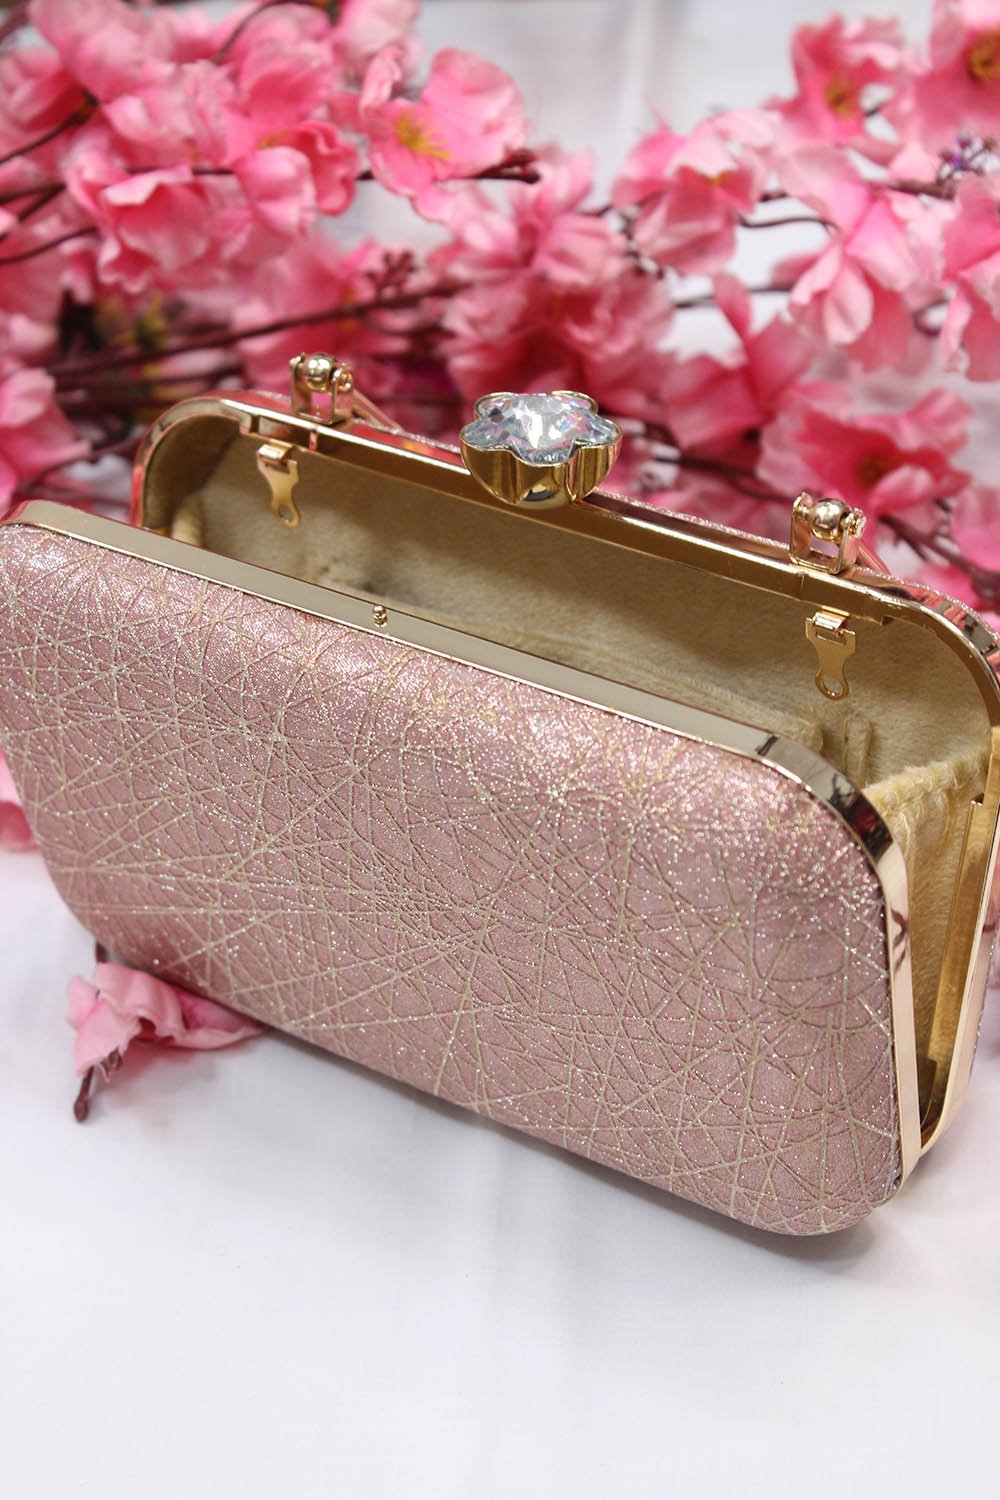 Rose Gold Clutch Sling Bag - Sparkle Your Way Through Any Occasion - Add a Statement to Your Outfit - Luxurion World